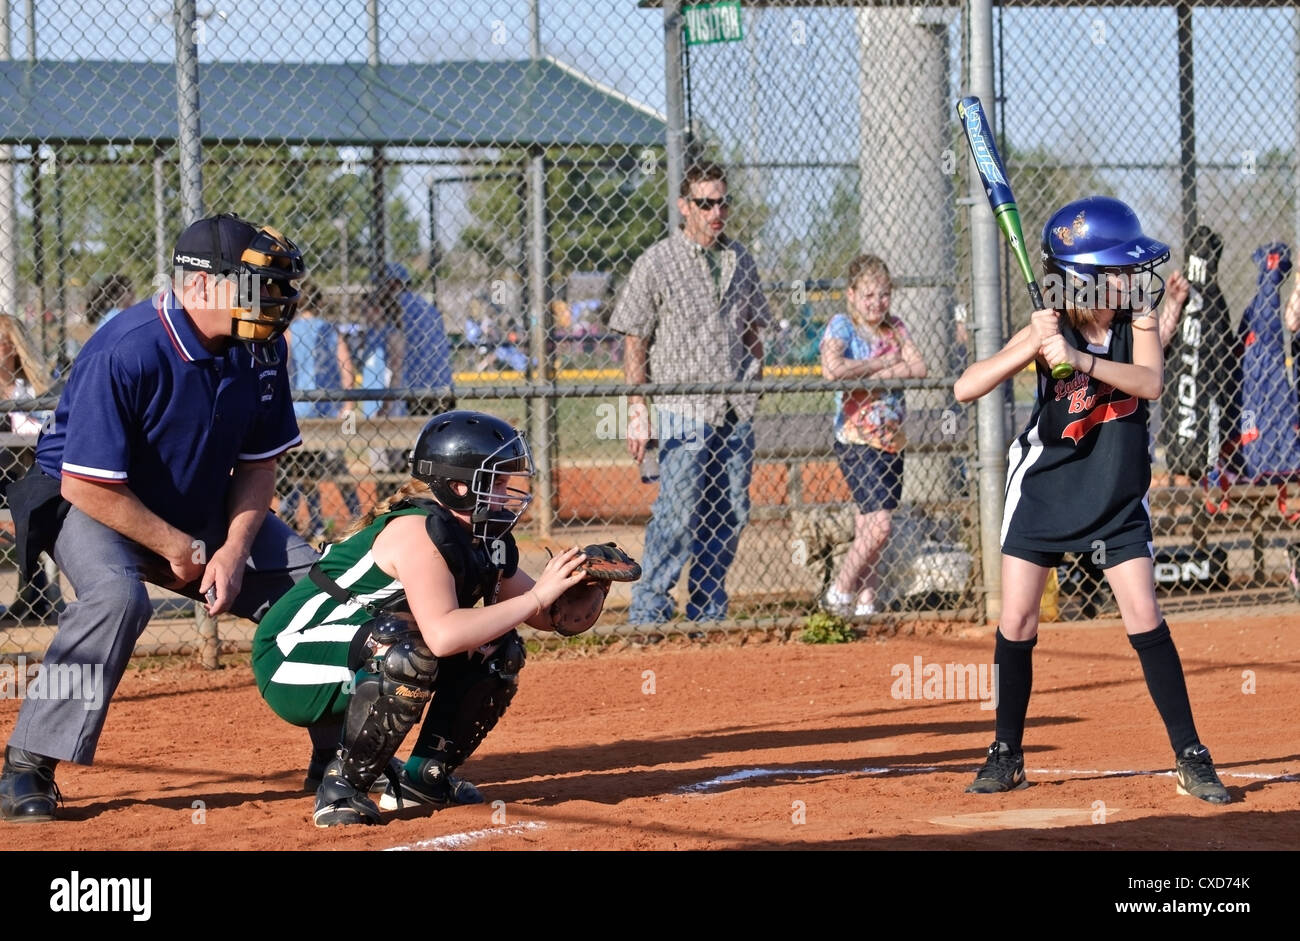 Action at home plate during a softball game showing the batter, catcher, and umpire. Stock Photo